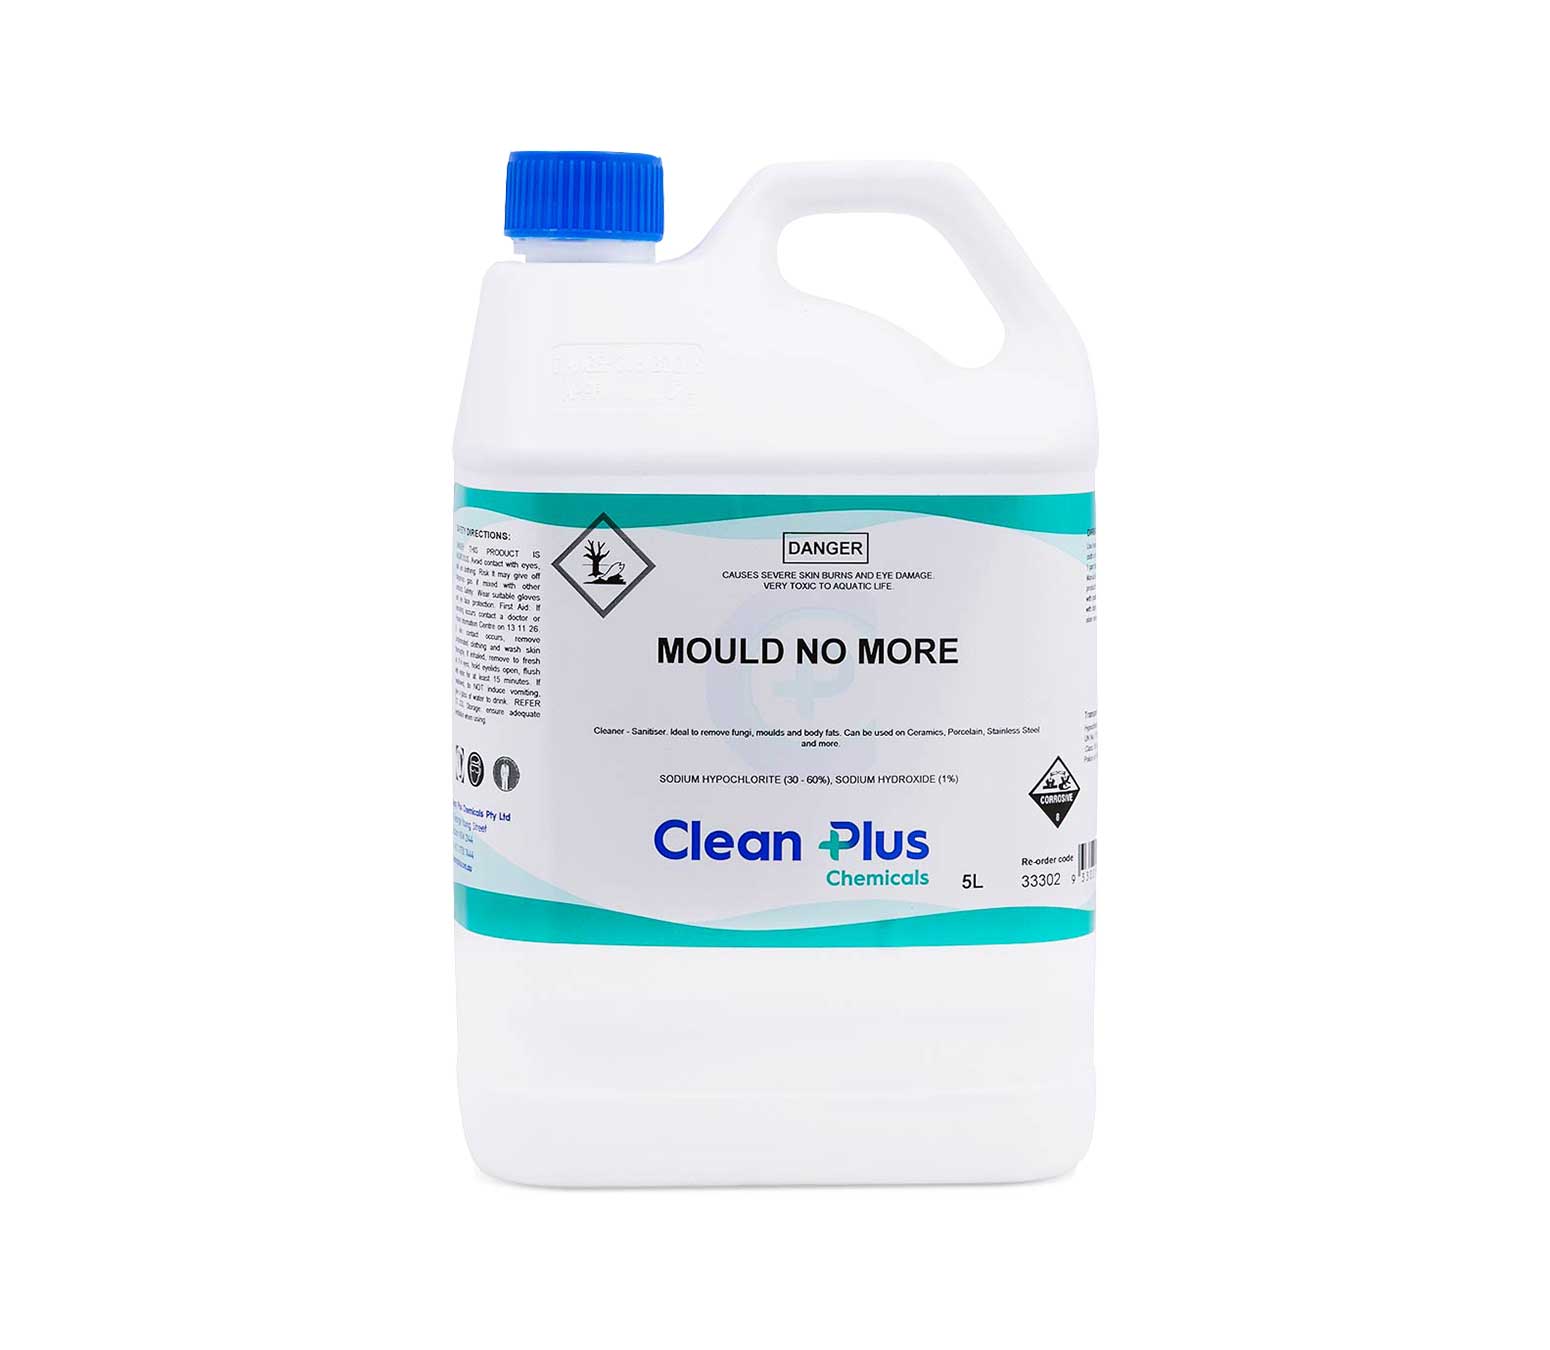 Mould No More - Mould & Germs Remover.